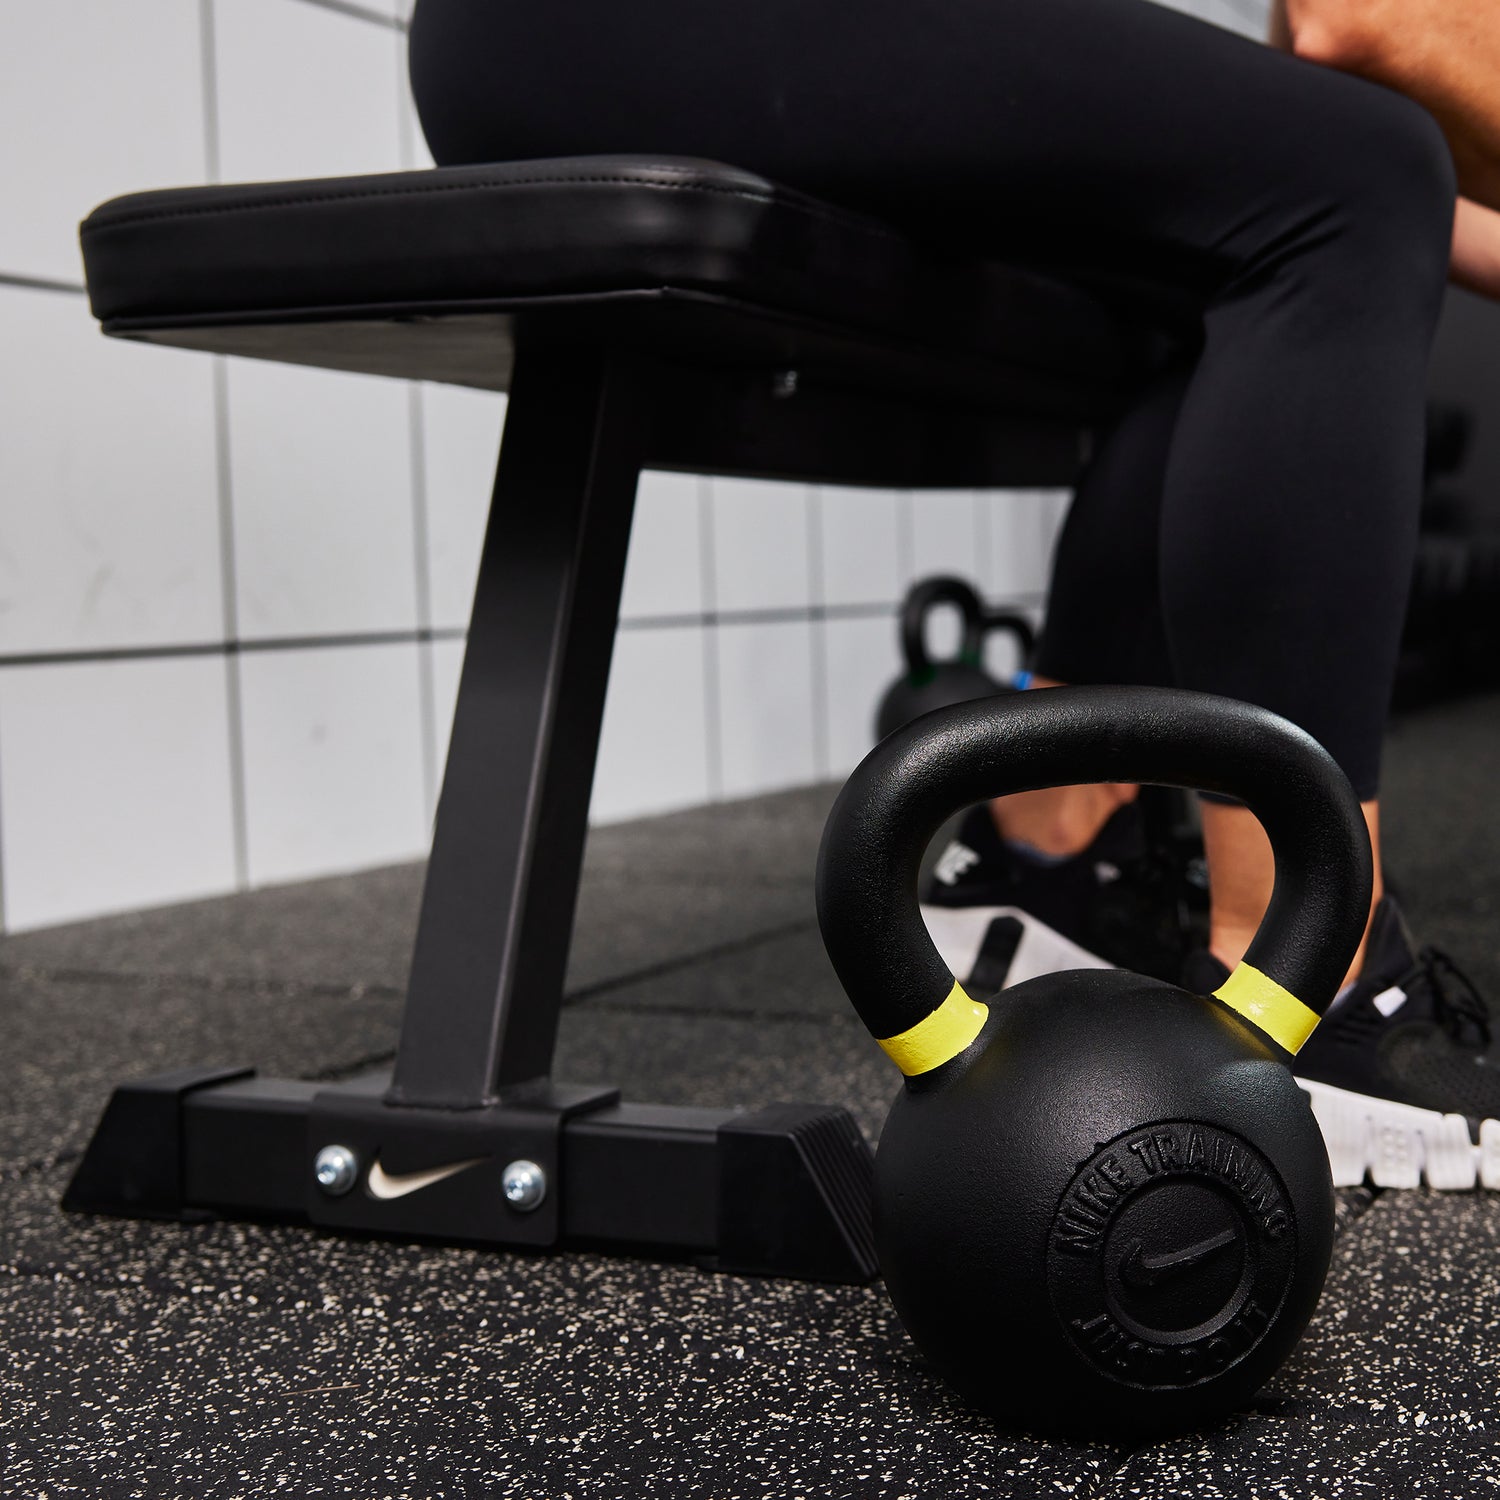 Female athlete sitting on the Nike Flat Weight Bench next to two Nike Kettlebells 35 LB